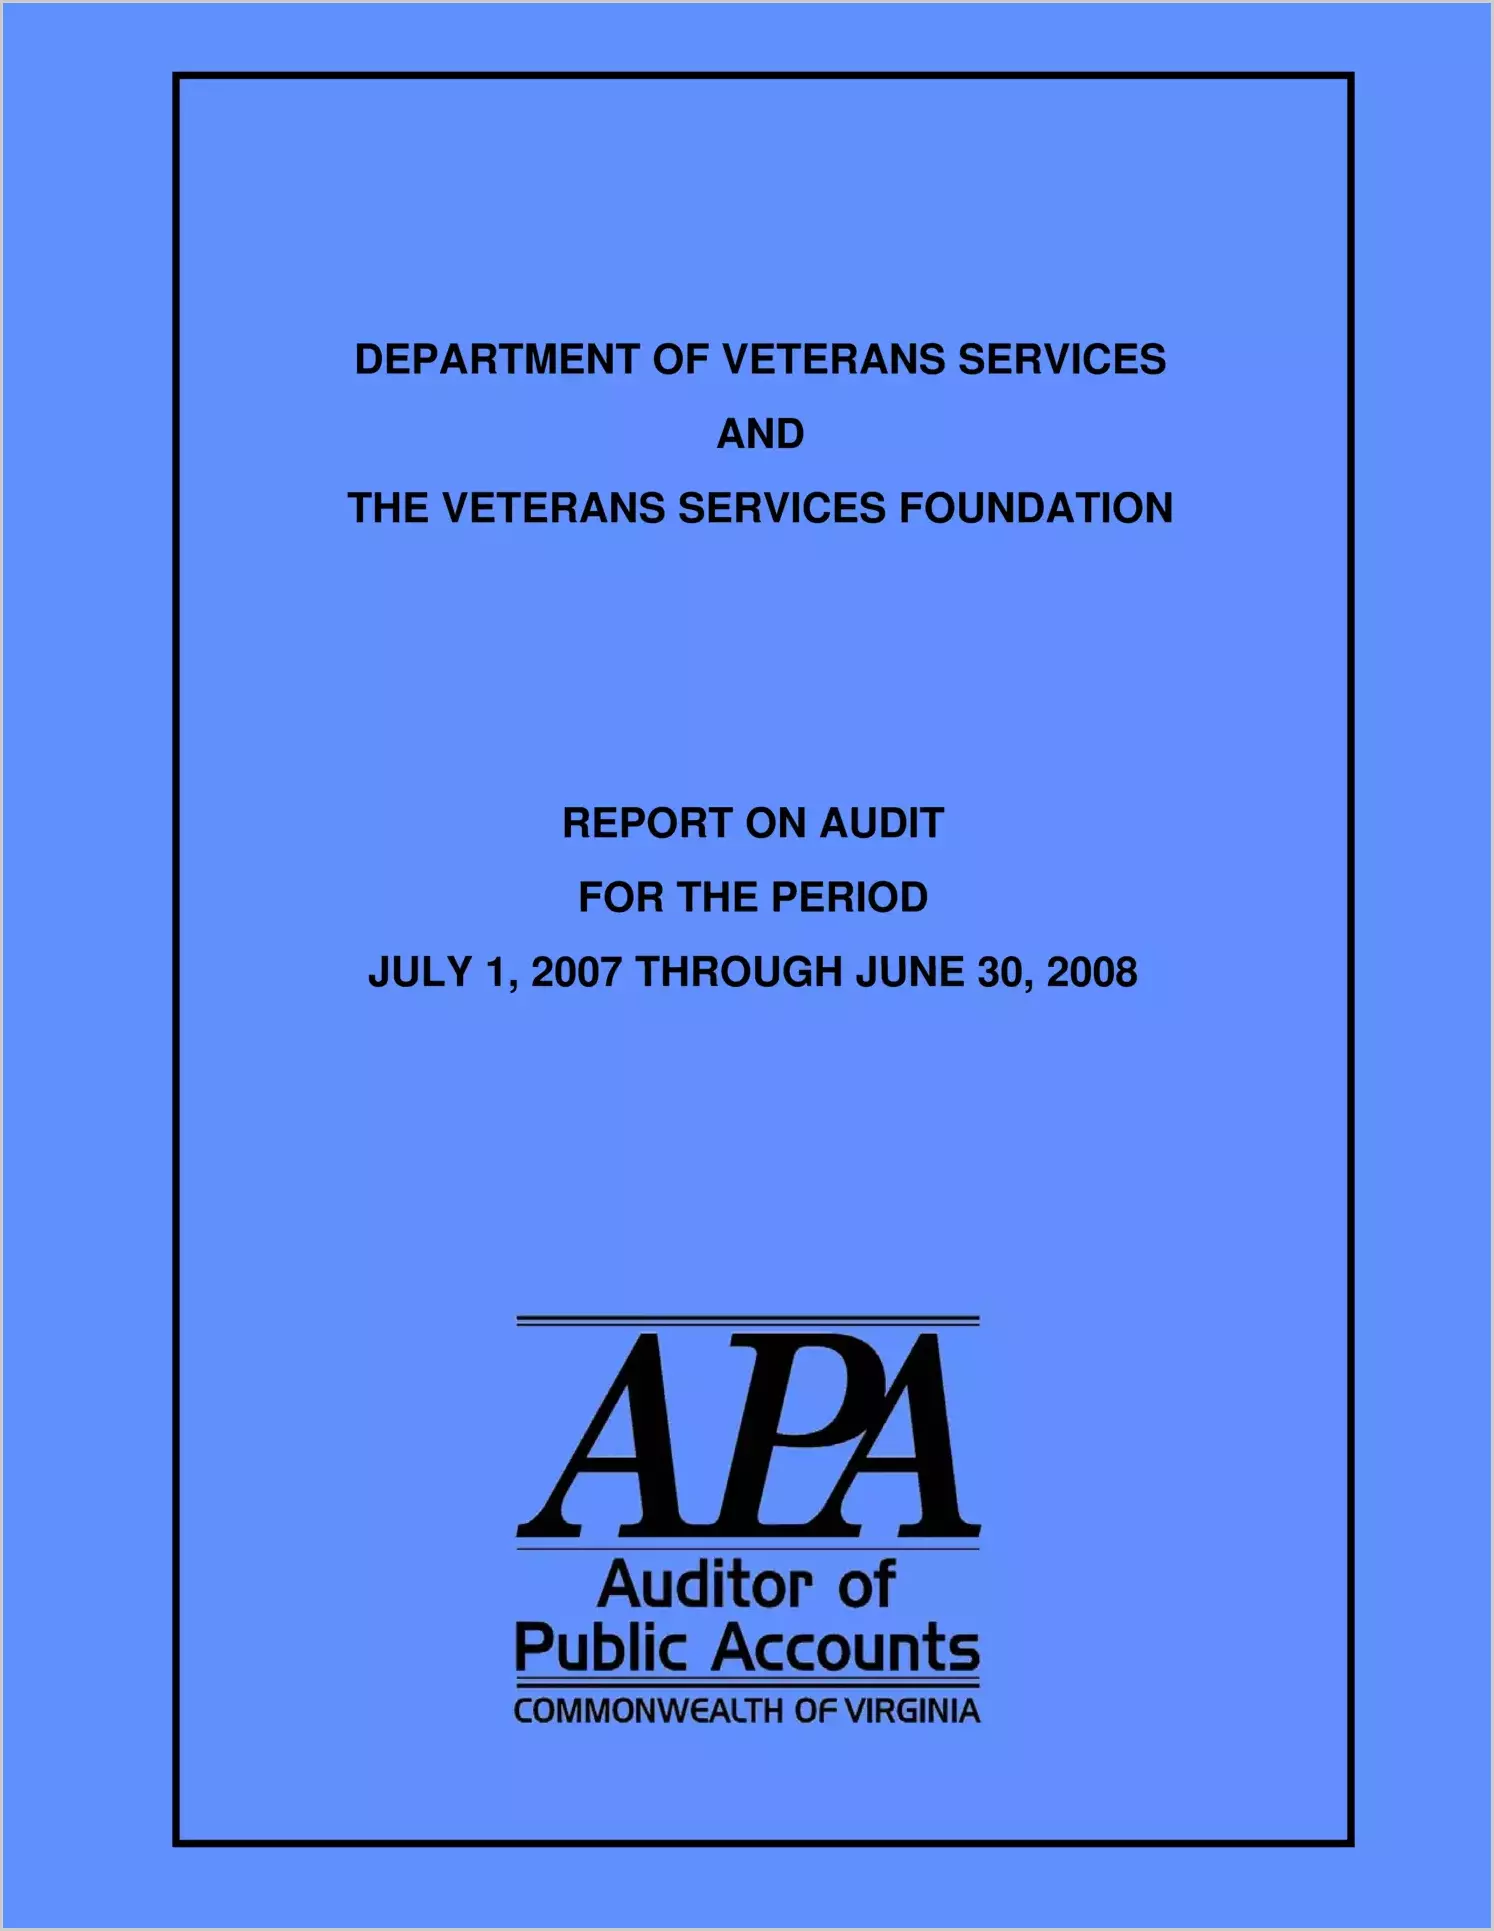 Department of Veterans Services and the Veterans Services Foundation for the period July 1, 2007 through June 30, 2008